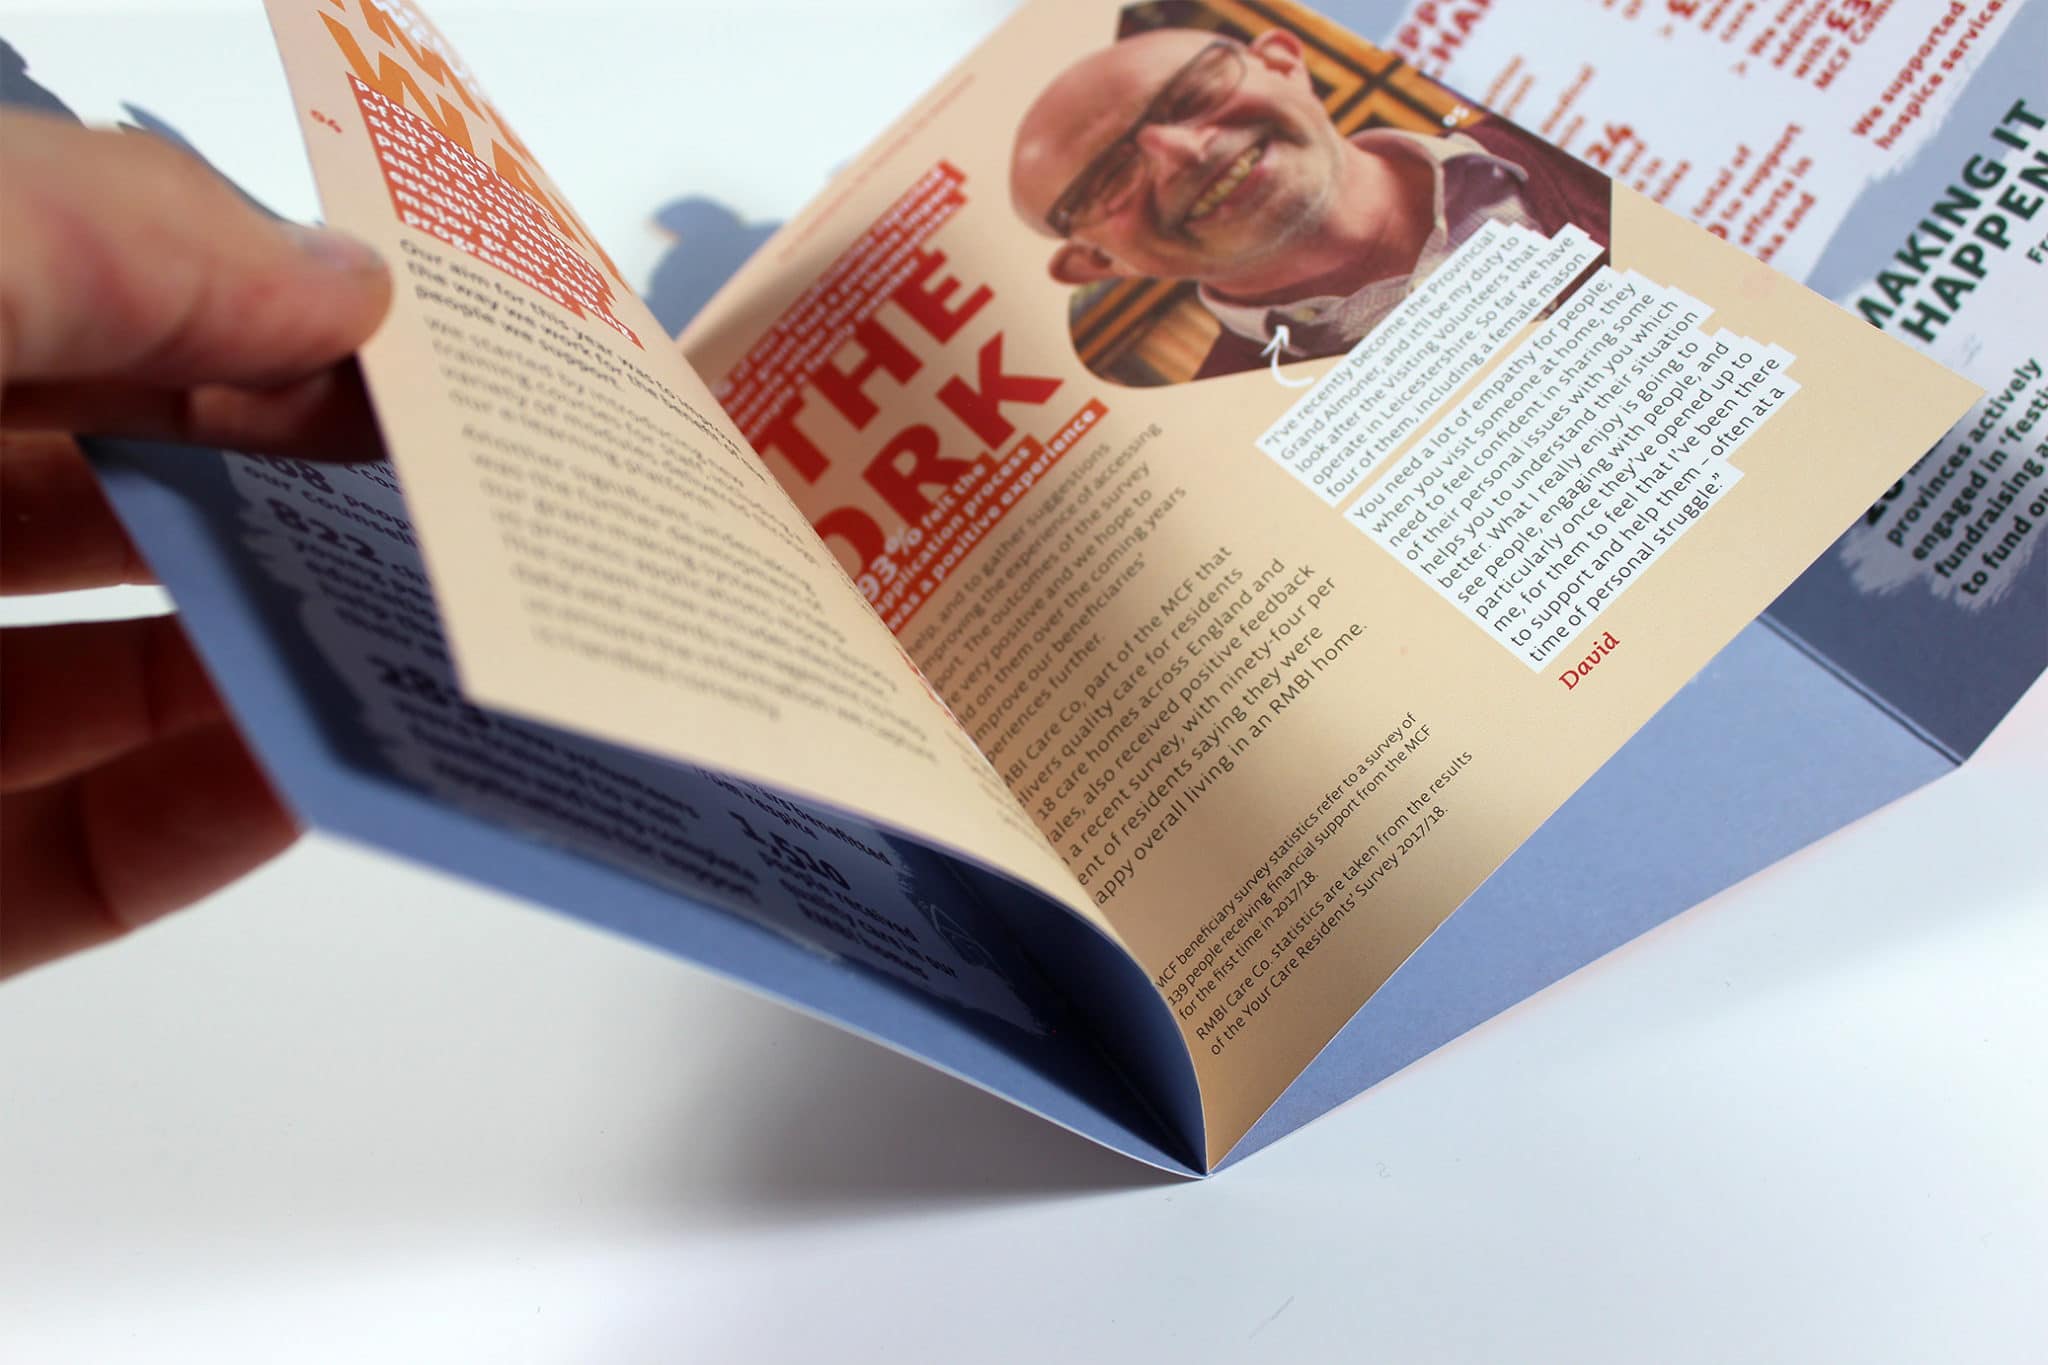 Brochure Printing costs Explained